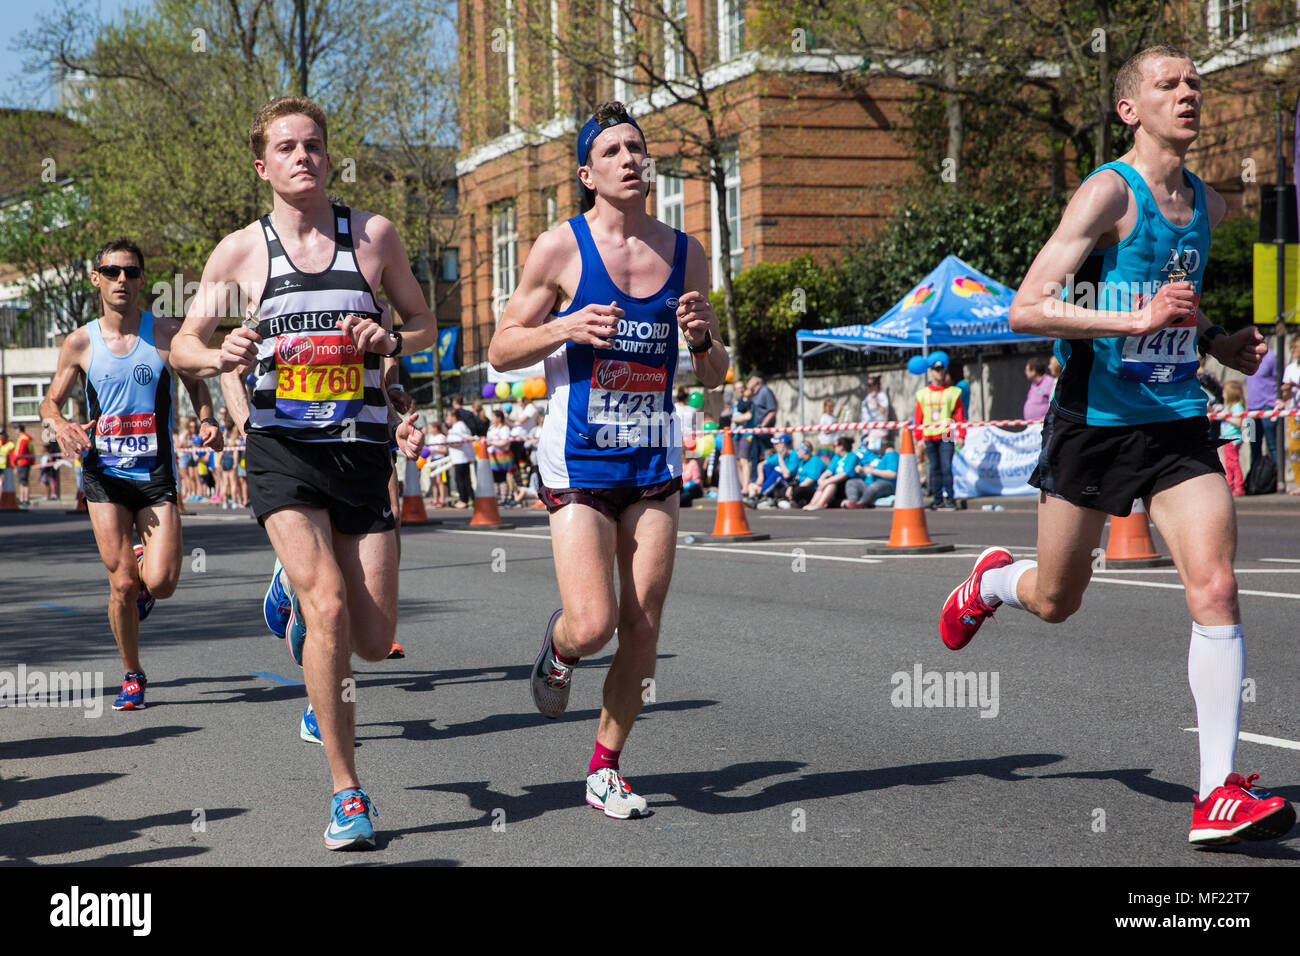 London, UK. 22nd April, 2018. Roger Poolman (l) of Highgate Harriers, Michael Channing (c) of Bedford and County AC and Robert Latala (r) of Ashford and District RRC compete in the 2018 Virgin Money London Marathon. The 38th edition of the race was the hottest on record with a temperature of 24.1C recorded in St James’s Park. Stock Photo